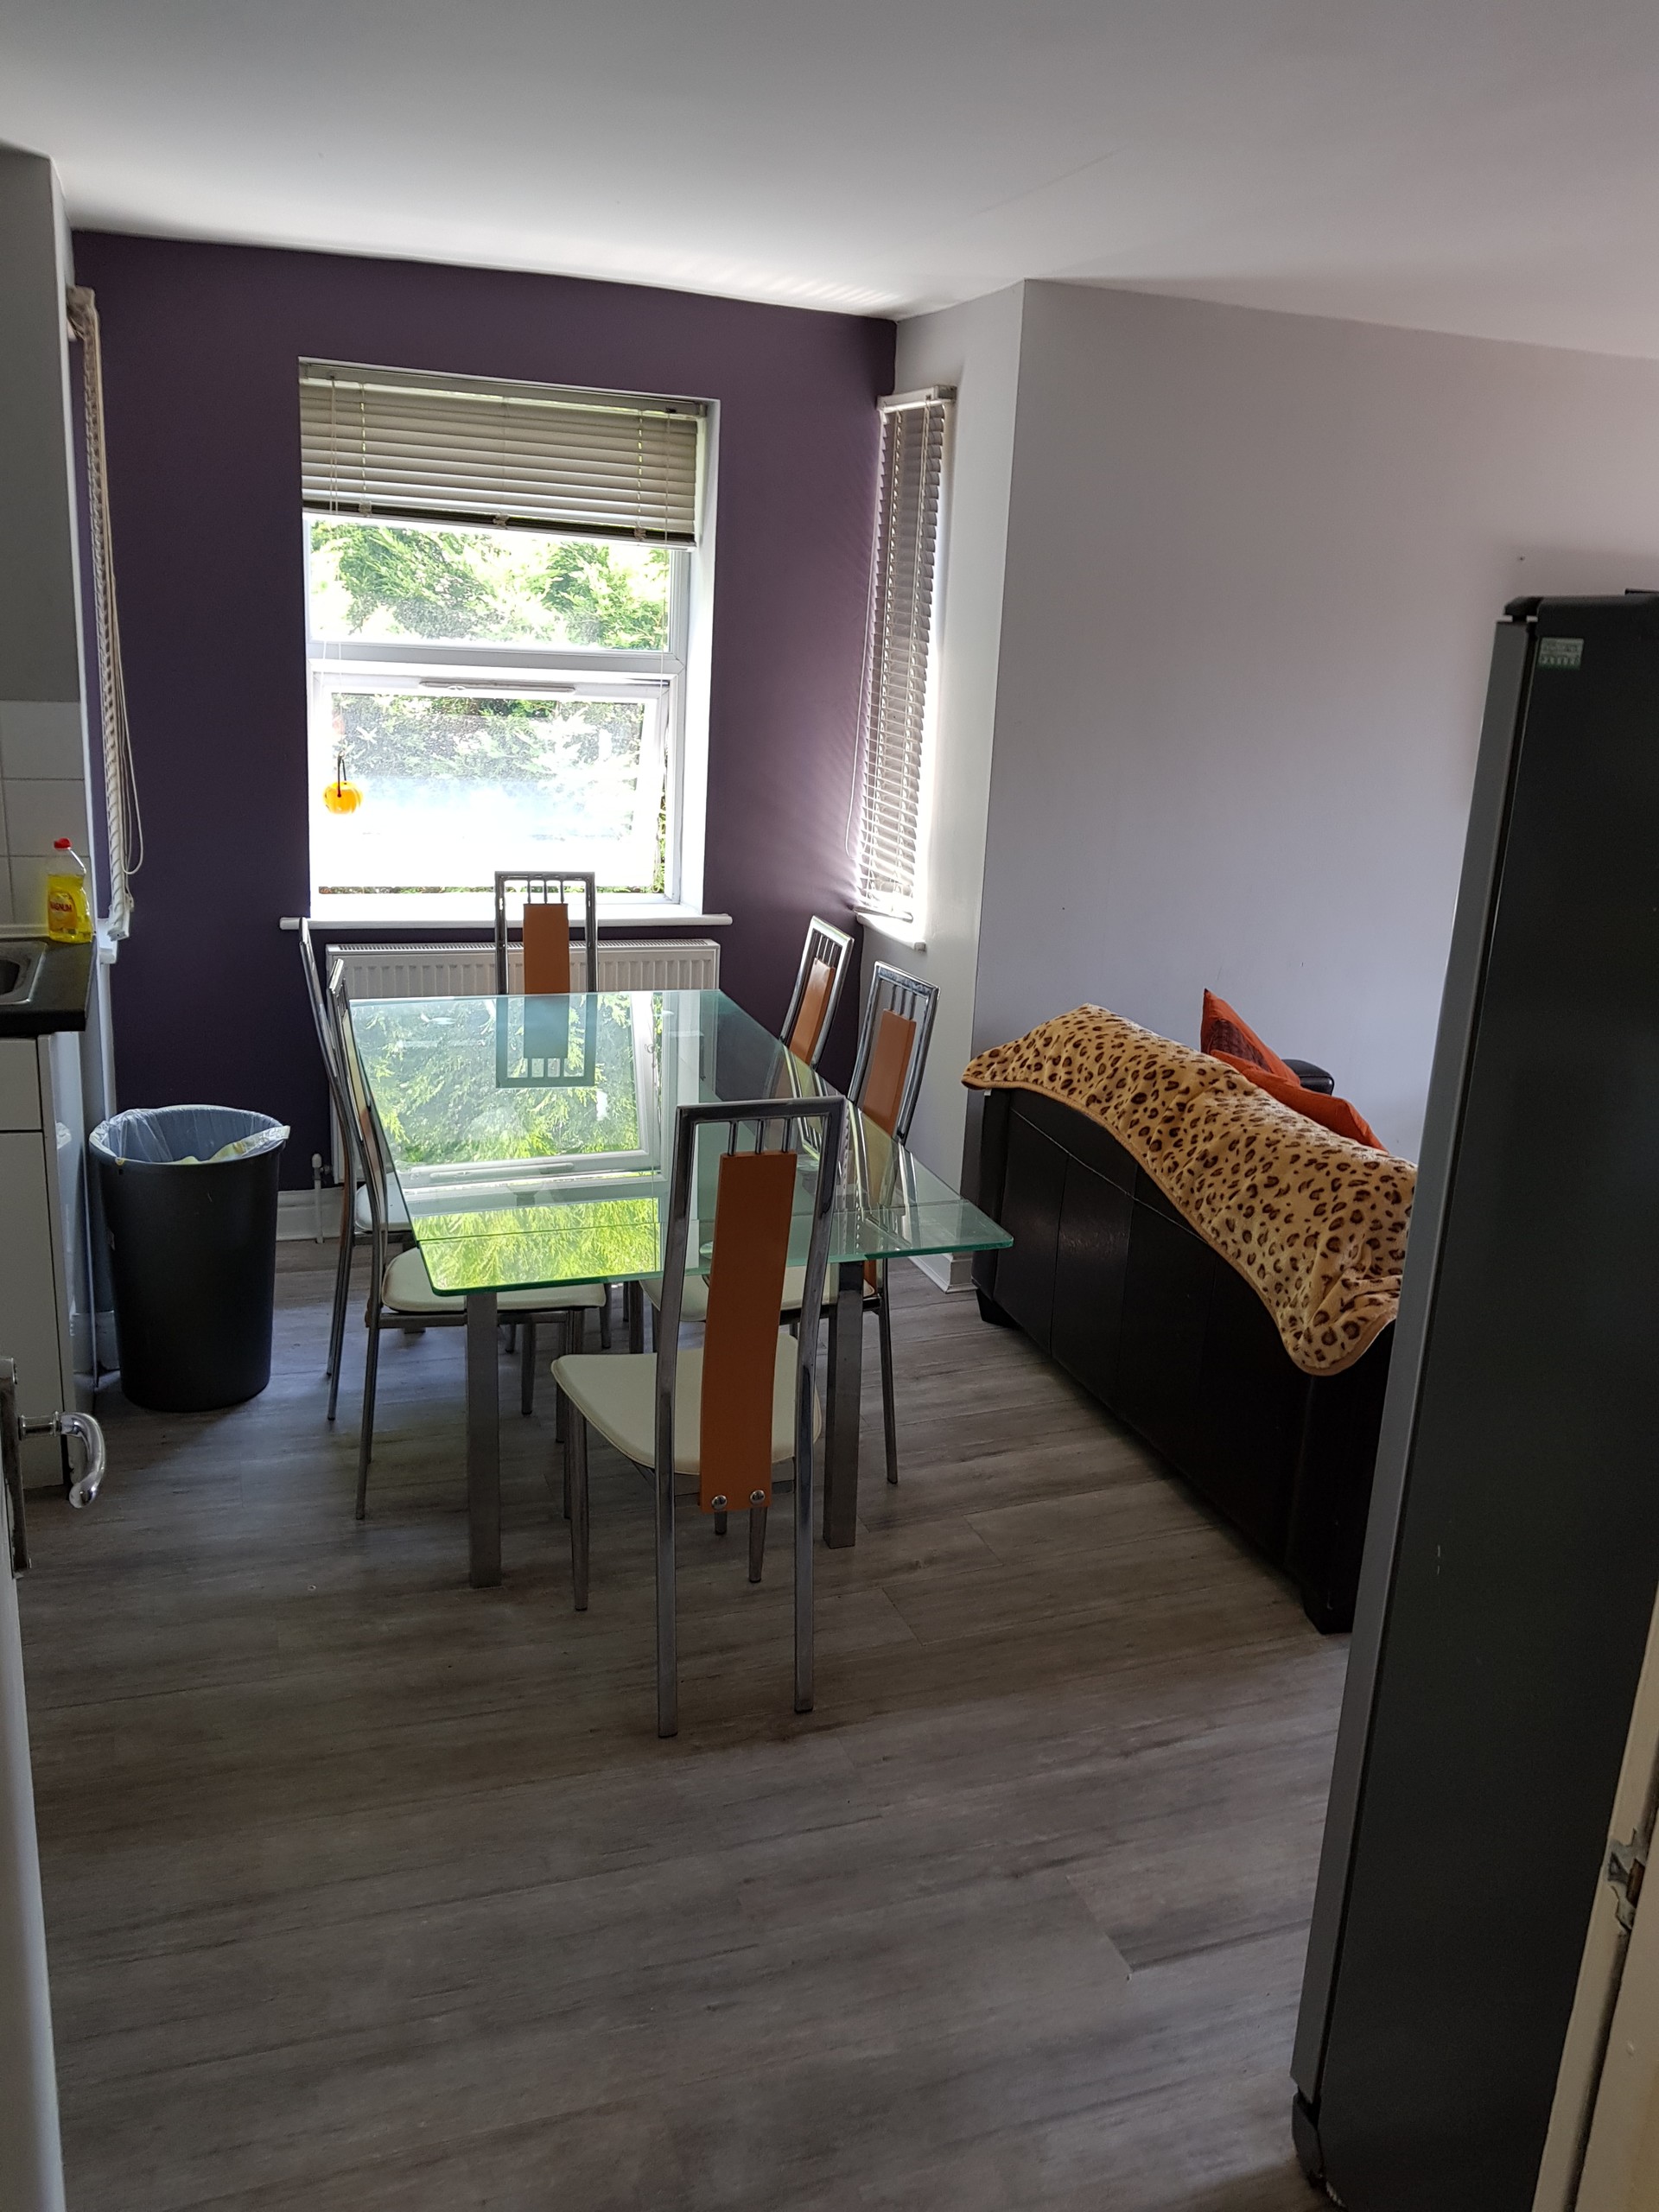 Rooms to.rent | Room for rent Manchester